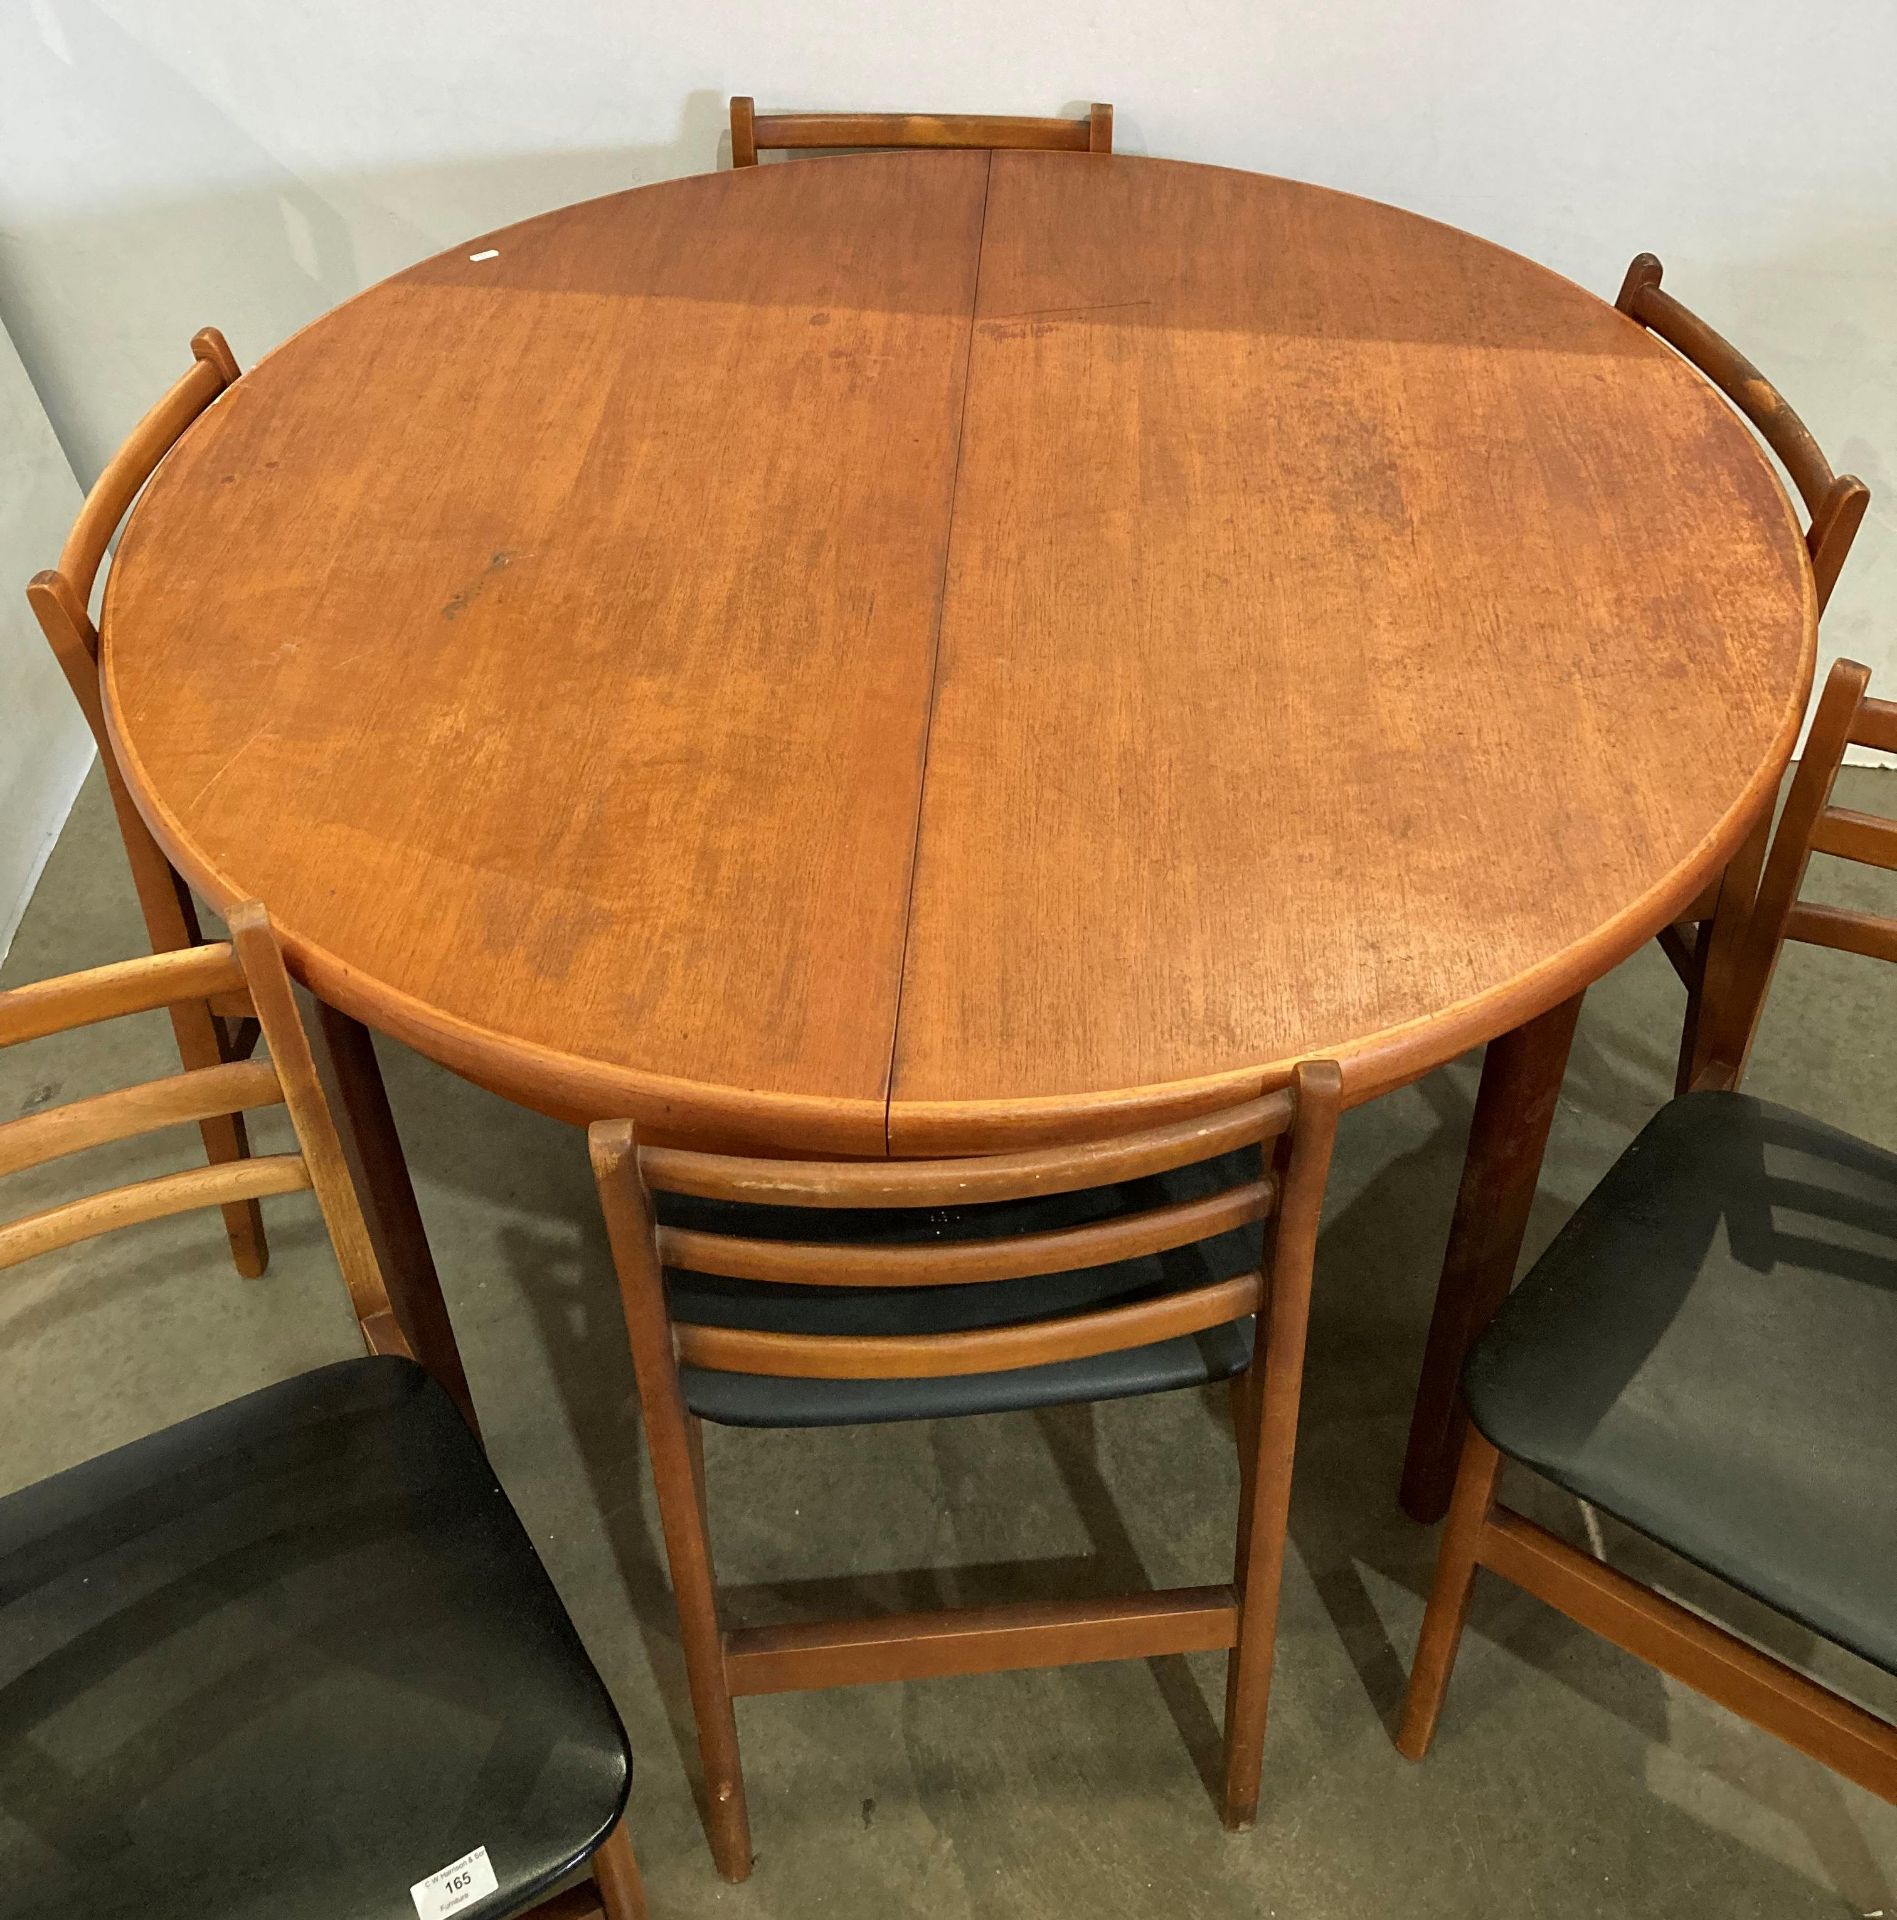 Mid-Century circular extending dining table - possibly Danish (no makers mark visible) - and a set - Image 2 of 5